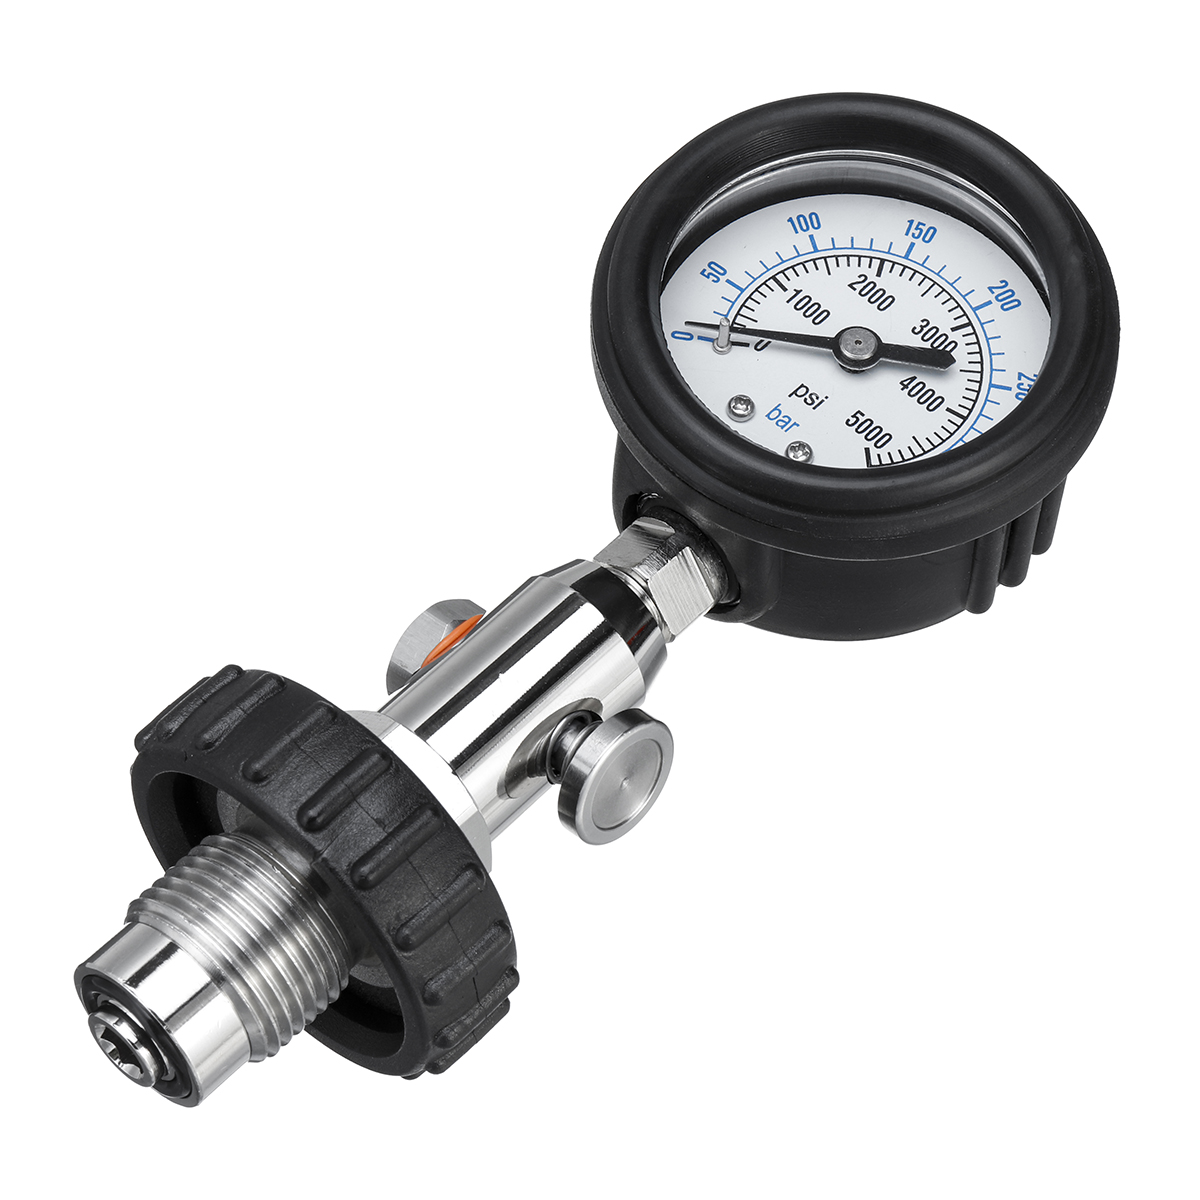 350-BAR-Axial-Hydraulic-Pressure-Gauge-Test-40MPa-6000PSI-Stainless-Steel-Indicator-1649890-6